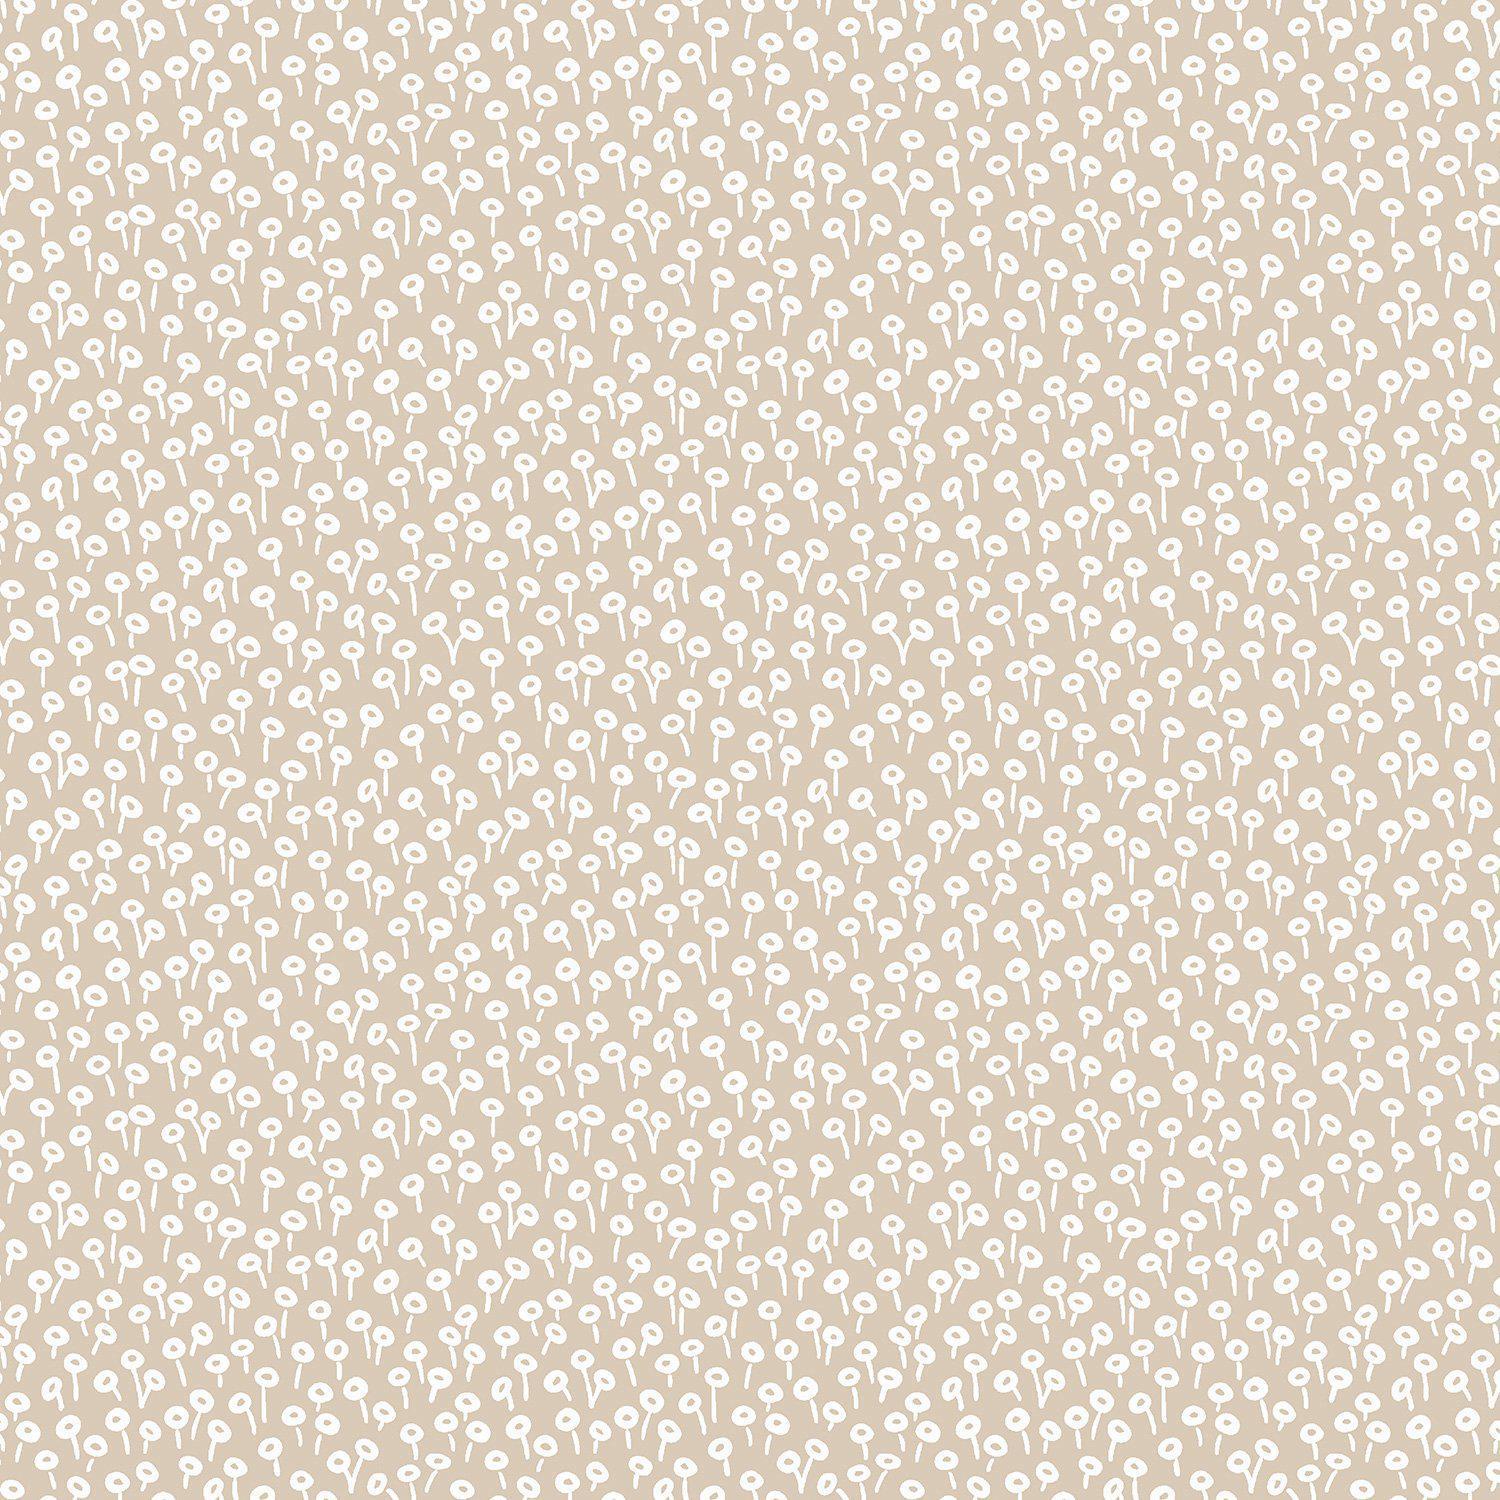 Cotton + Steel-REMNANT: Tapestry Dot - Linen 30% OFF 1.0 YDS-fabric remnant-gather here online